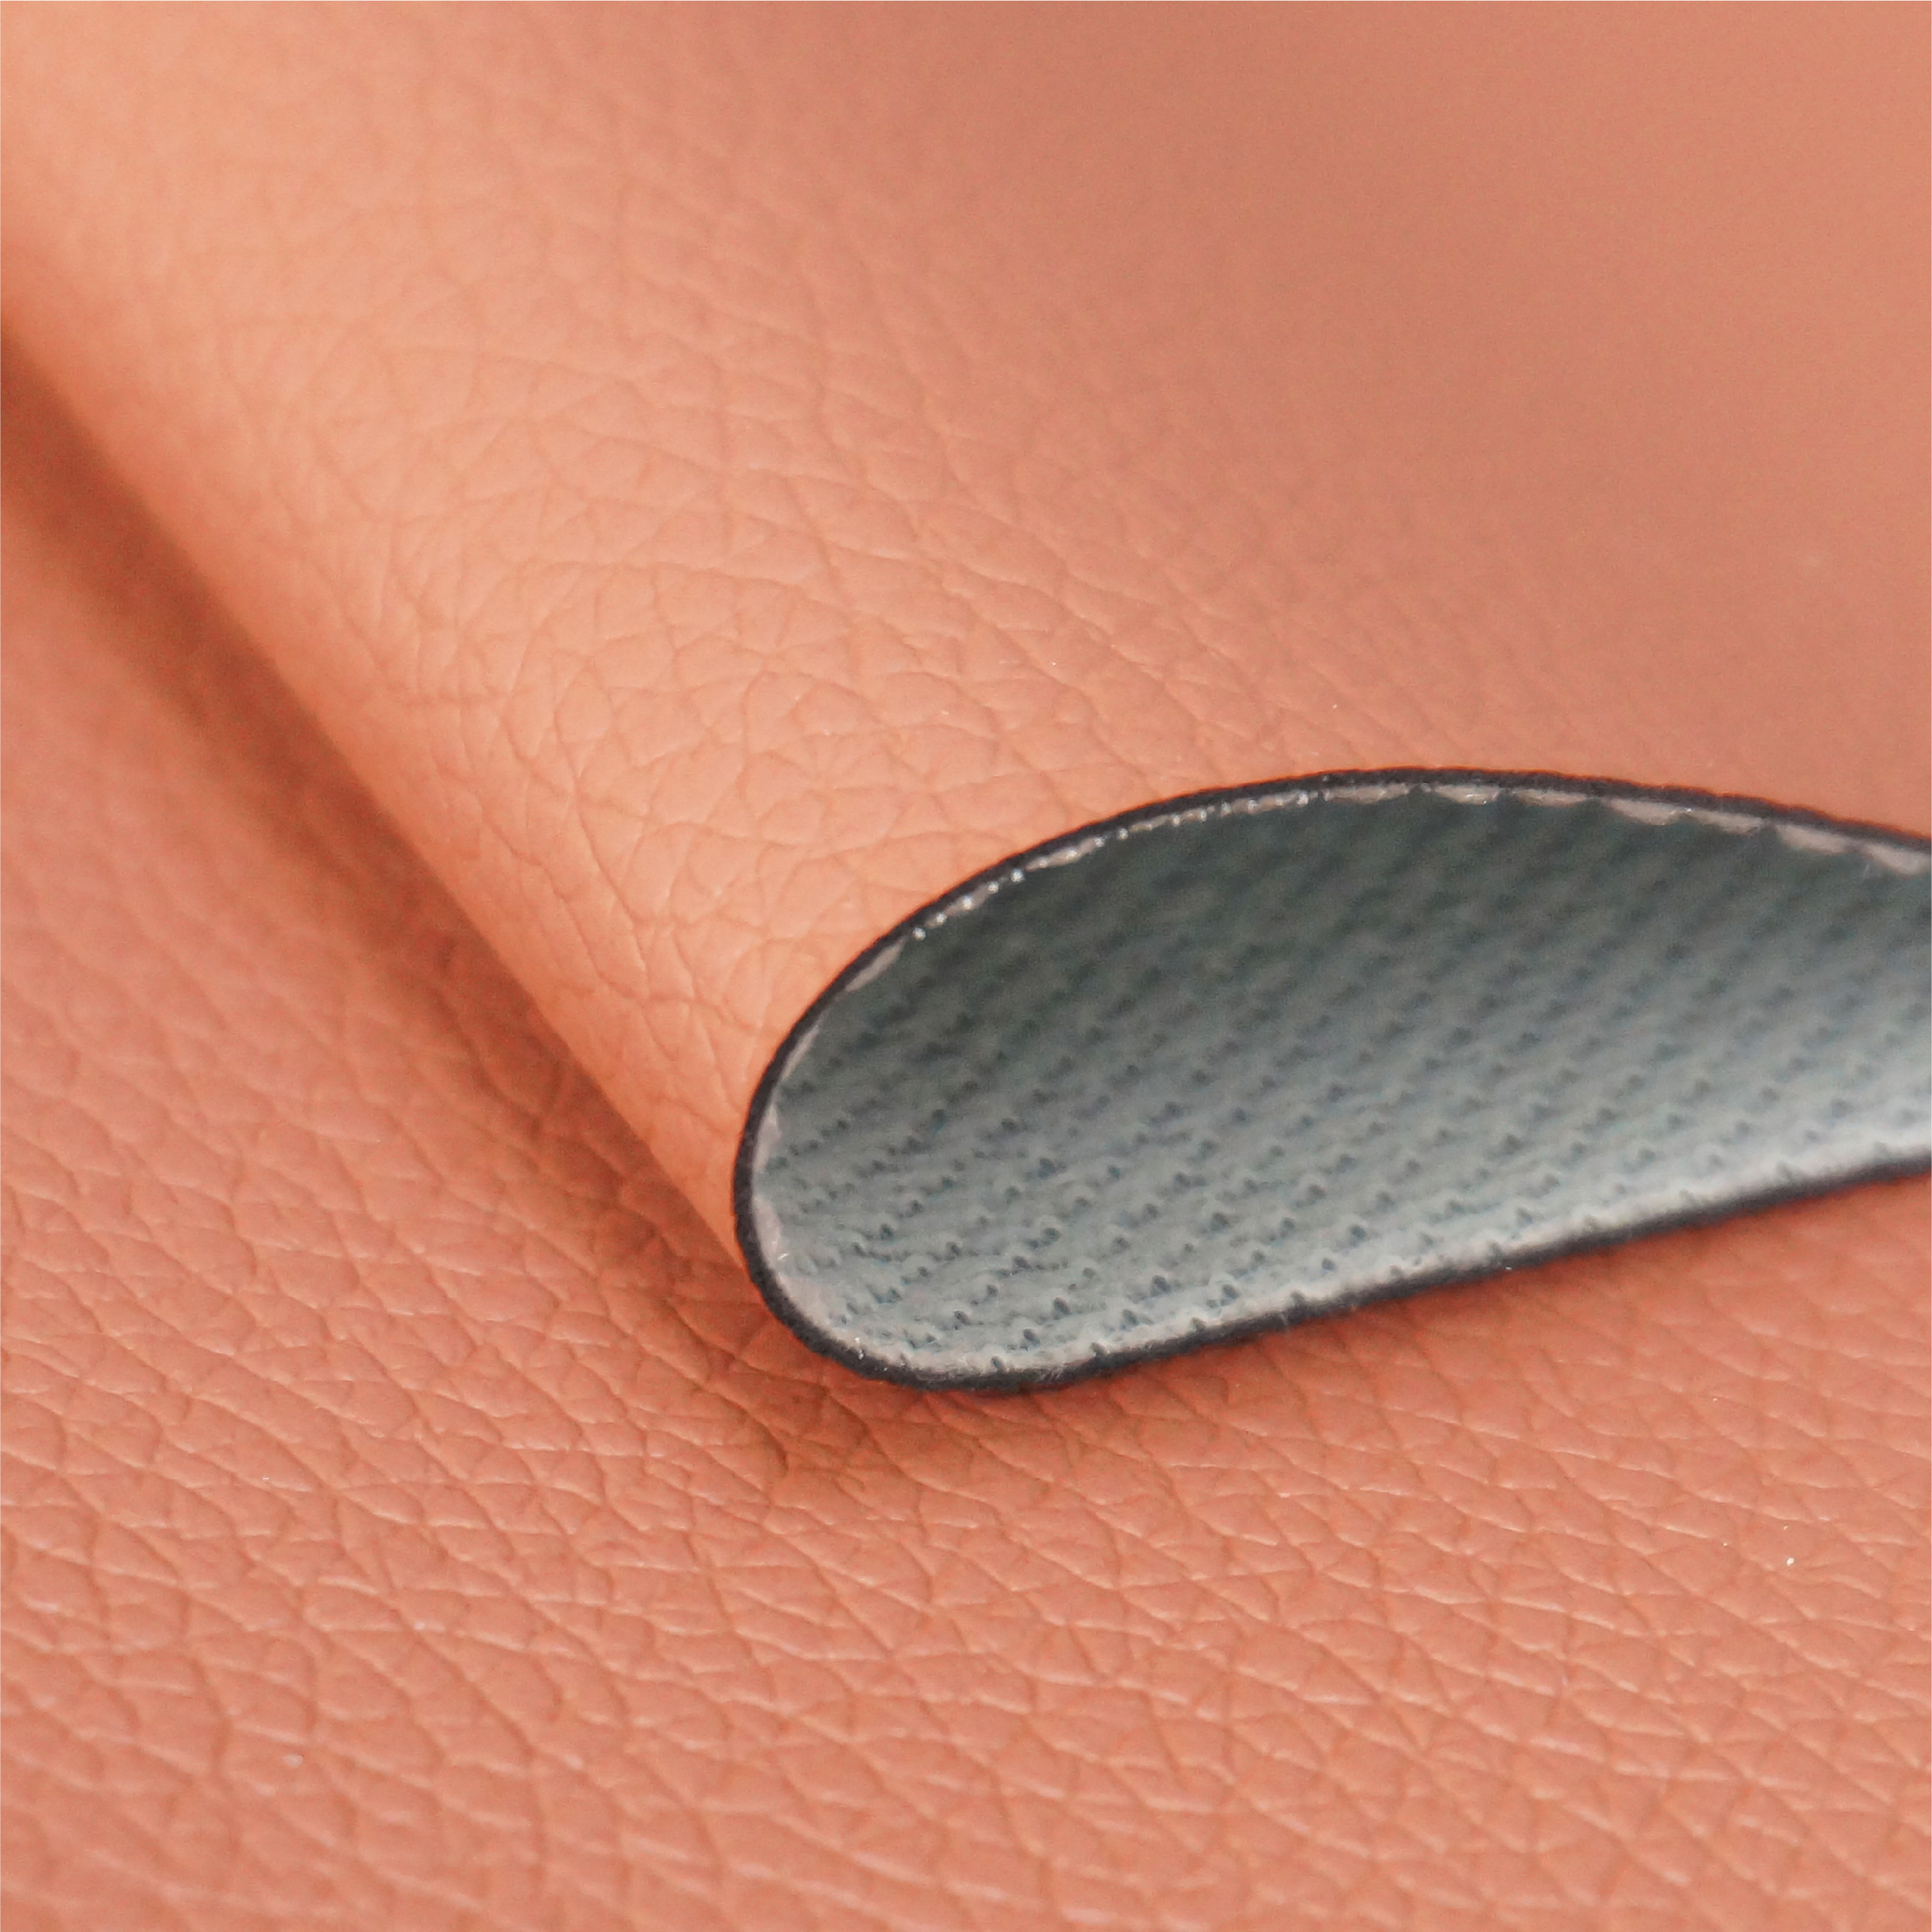 High quality PU leather, PVC leather ,Man-made Leather ,synthetic leather  made in China 